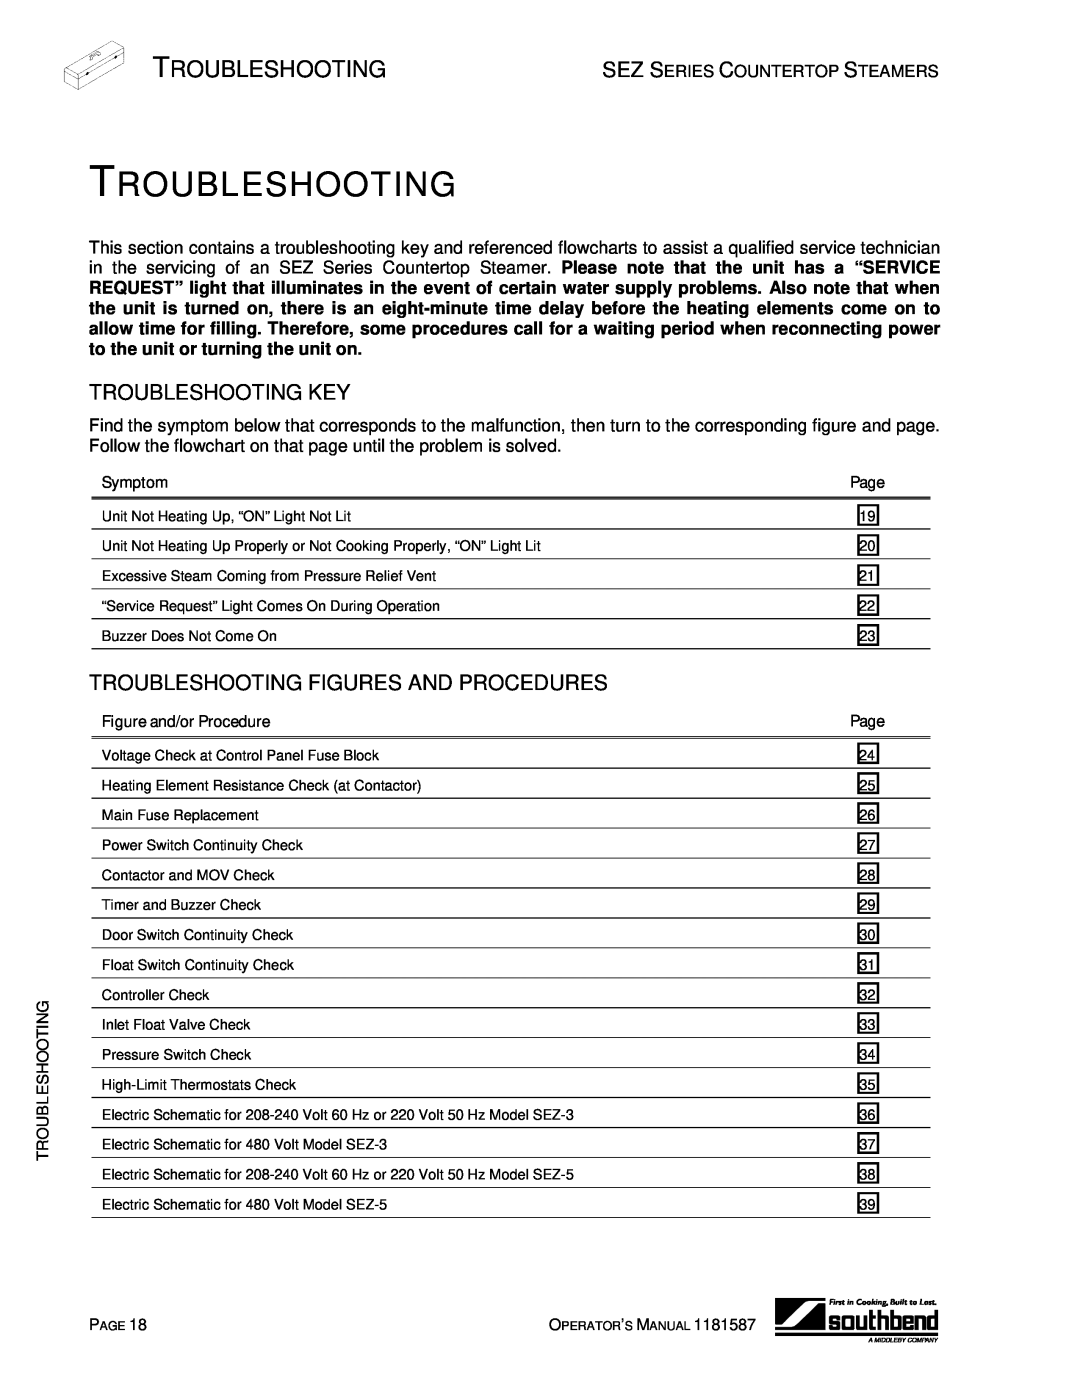 Southbend SEZ-5, SEZ-3 Troubleshooting Key, Troubleshooting Figures And Procedures, Symptom, Figure and/or Procedure 